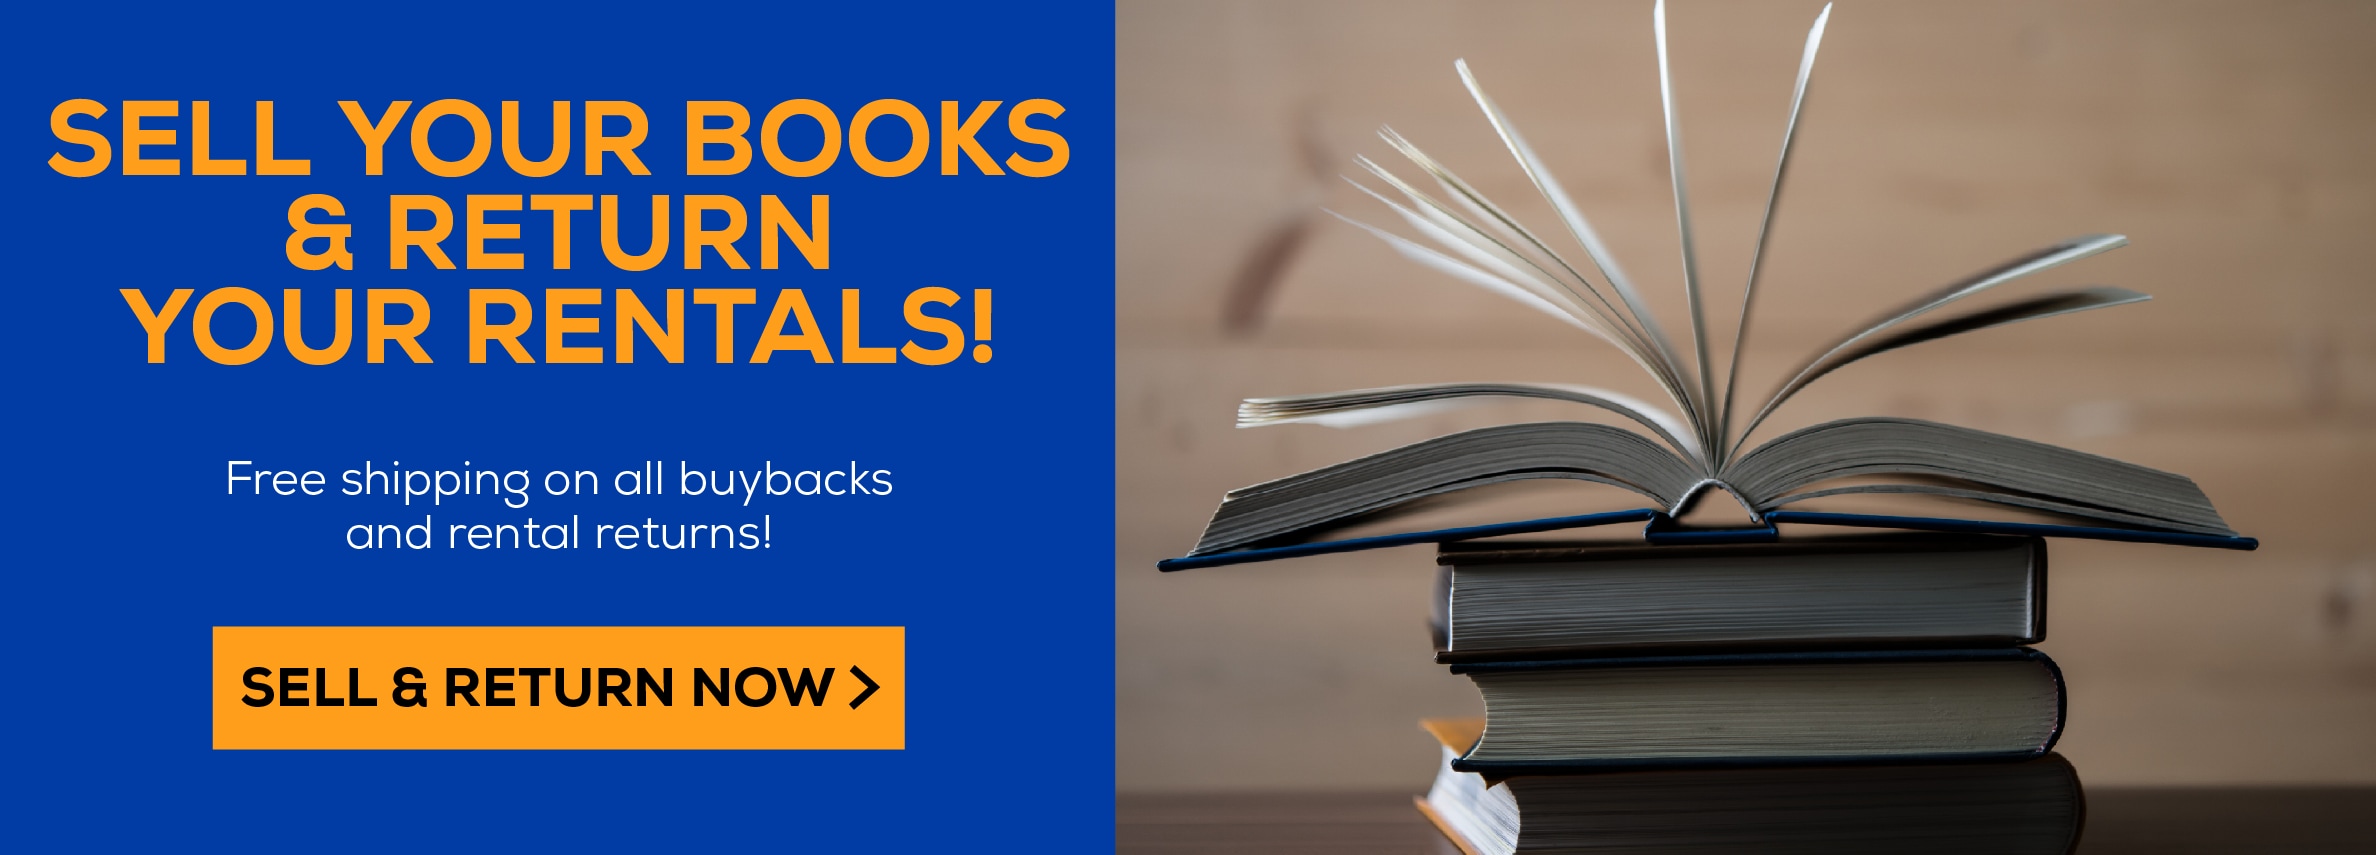 Sell your books and return your rentals! Free shipping on all buybacks and rentals returns! Sell and return now.